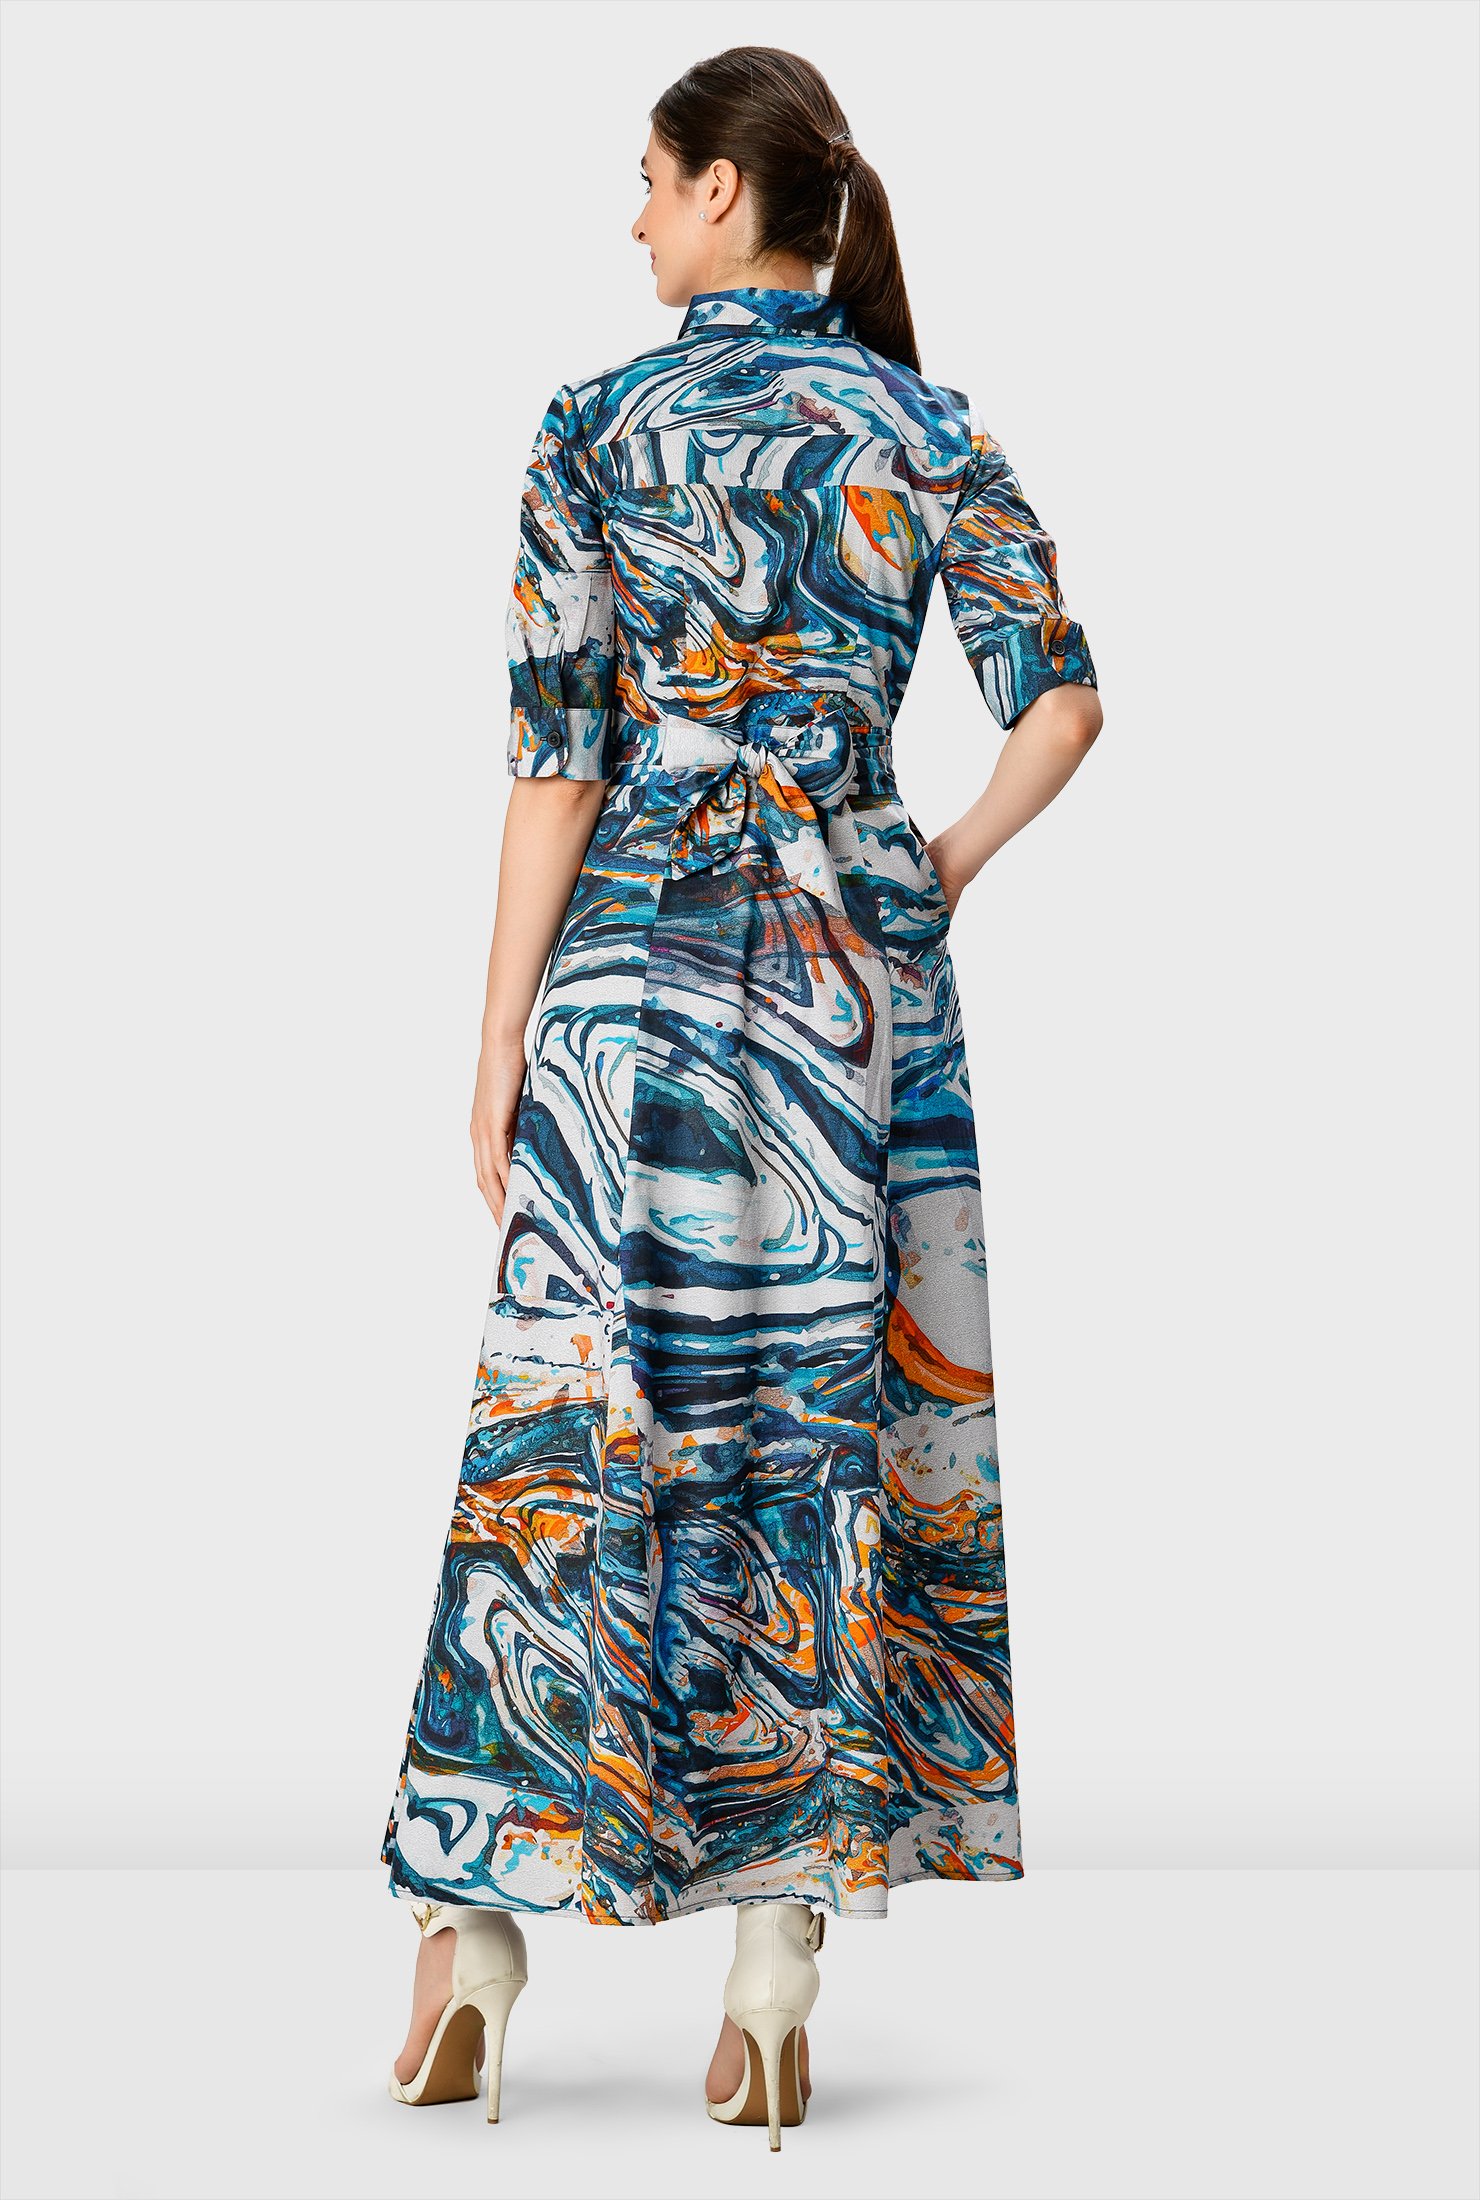 Elevate your abstract game in our chic maxi shirtdress fashioned with a smart spread collar, pleated cross-front at the empire waist and a ruched pleat full skirt.